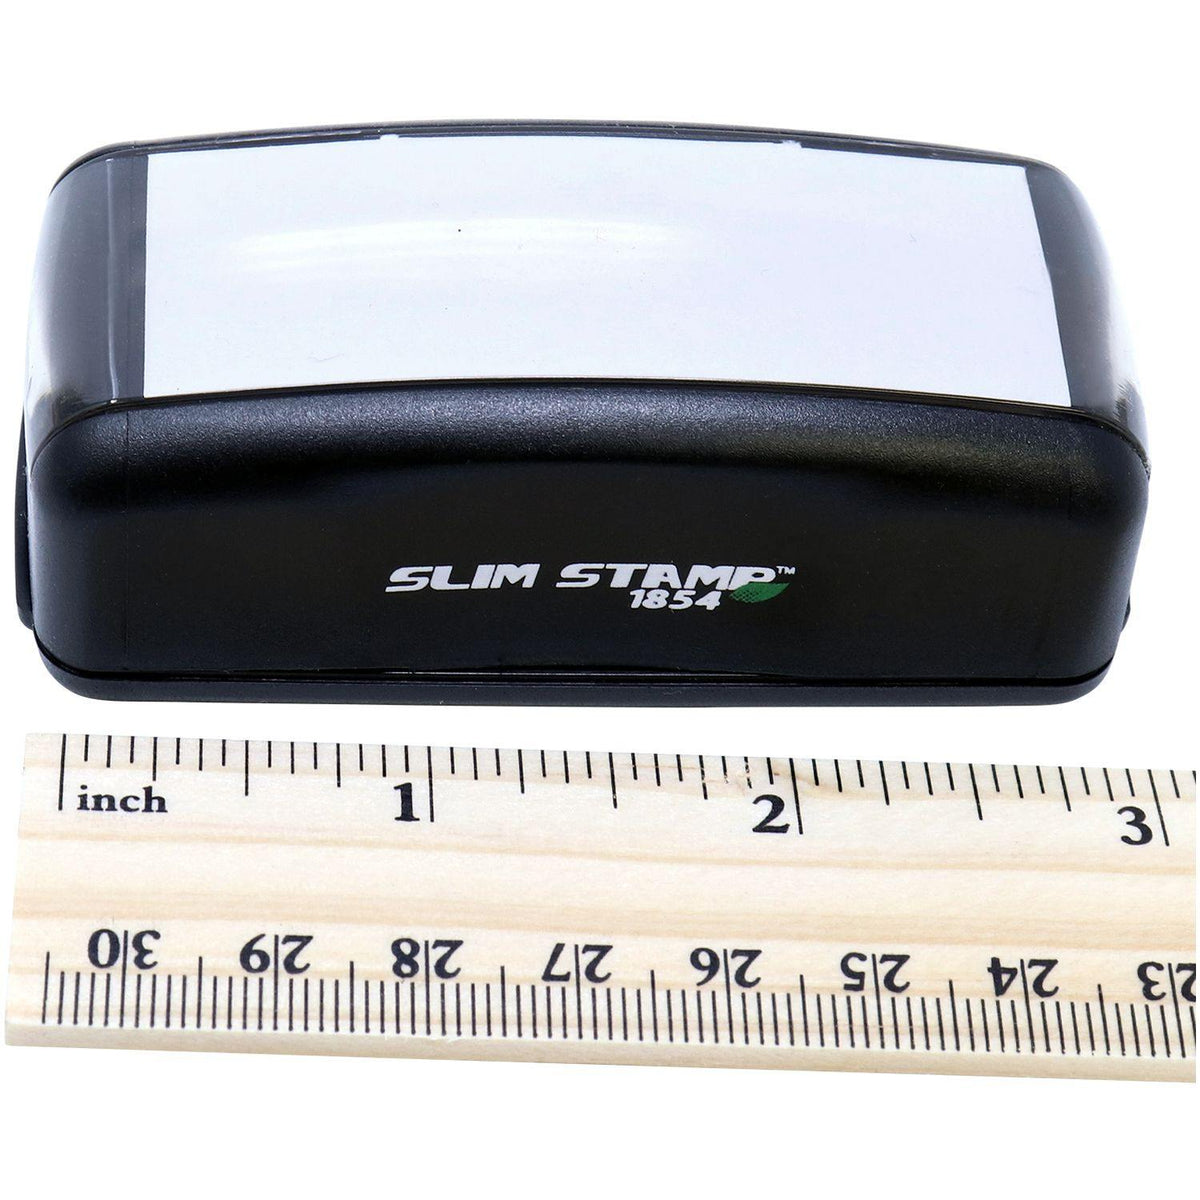 Measurement Large Pre Inked Client Copy Stamp with Ruler